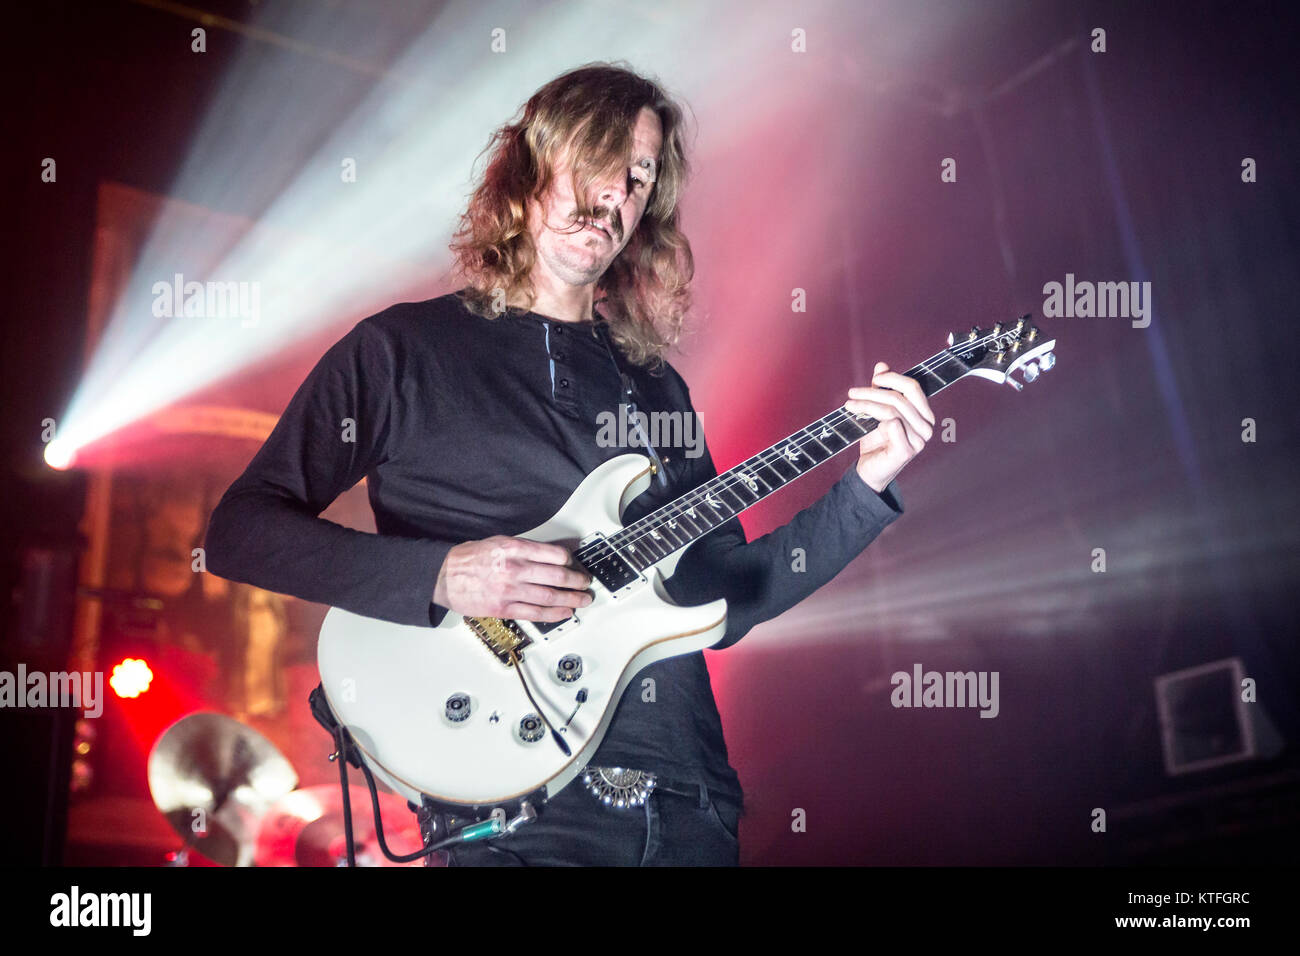 The progressive Swedish death metal band Opeth performs a live concert at Sentrum Scene in Oslo. Here vocalist and guitarist Mikael Åkerfeldt is seen live on stage. Norway, 14/11 2014. Stock Photo